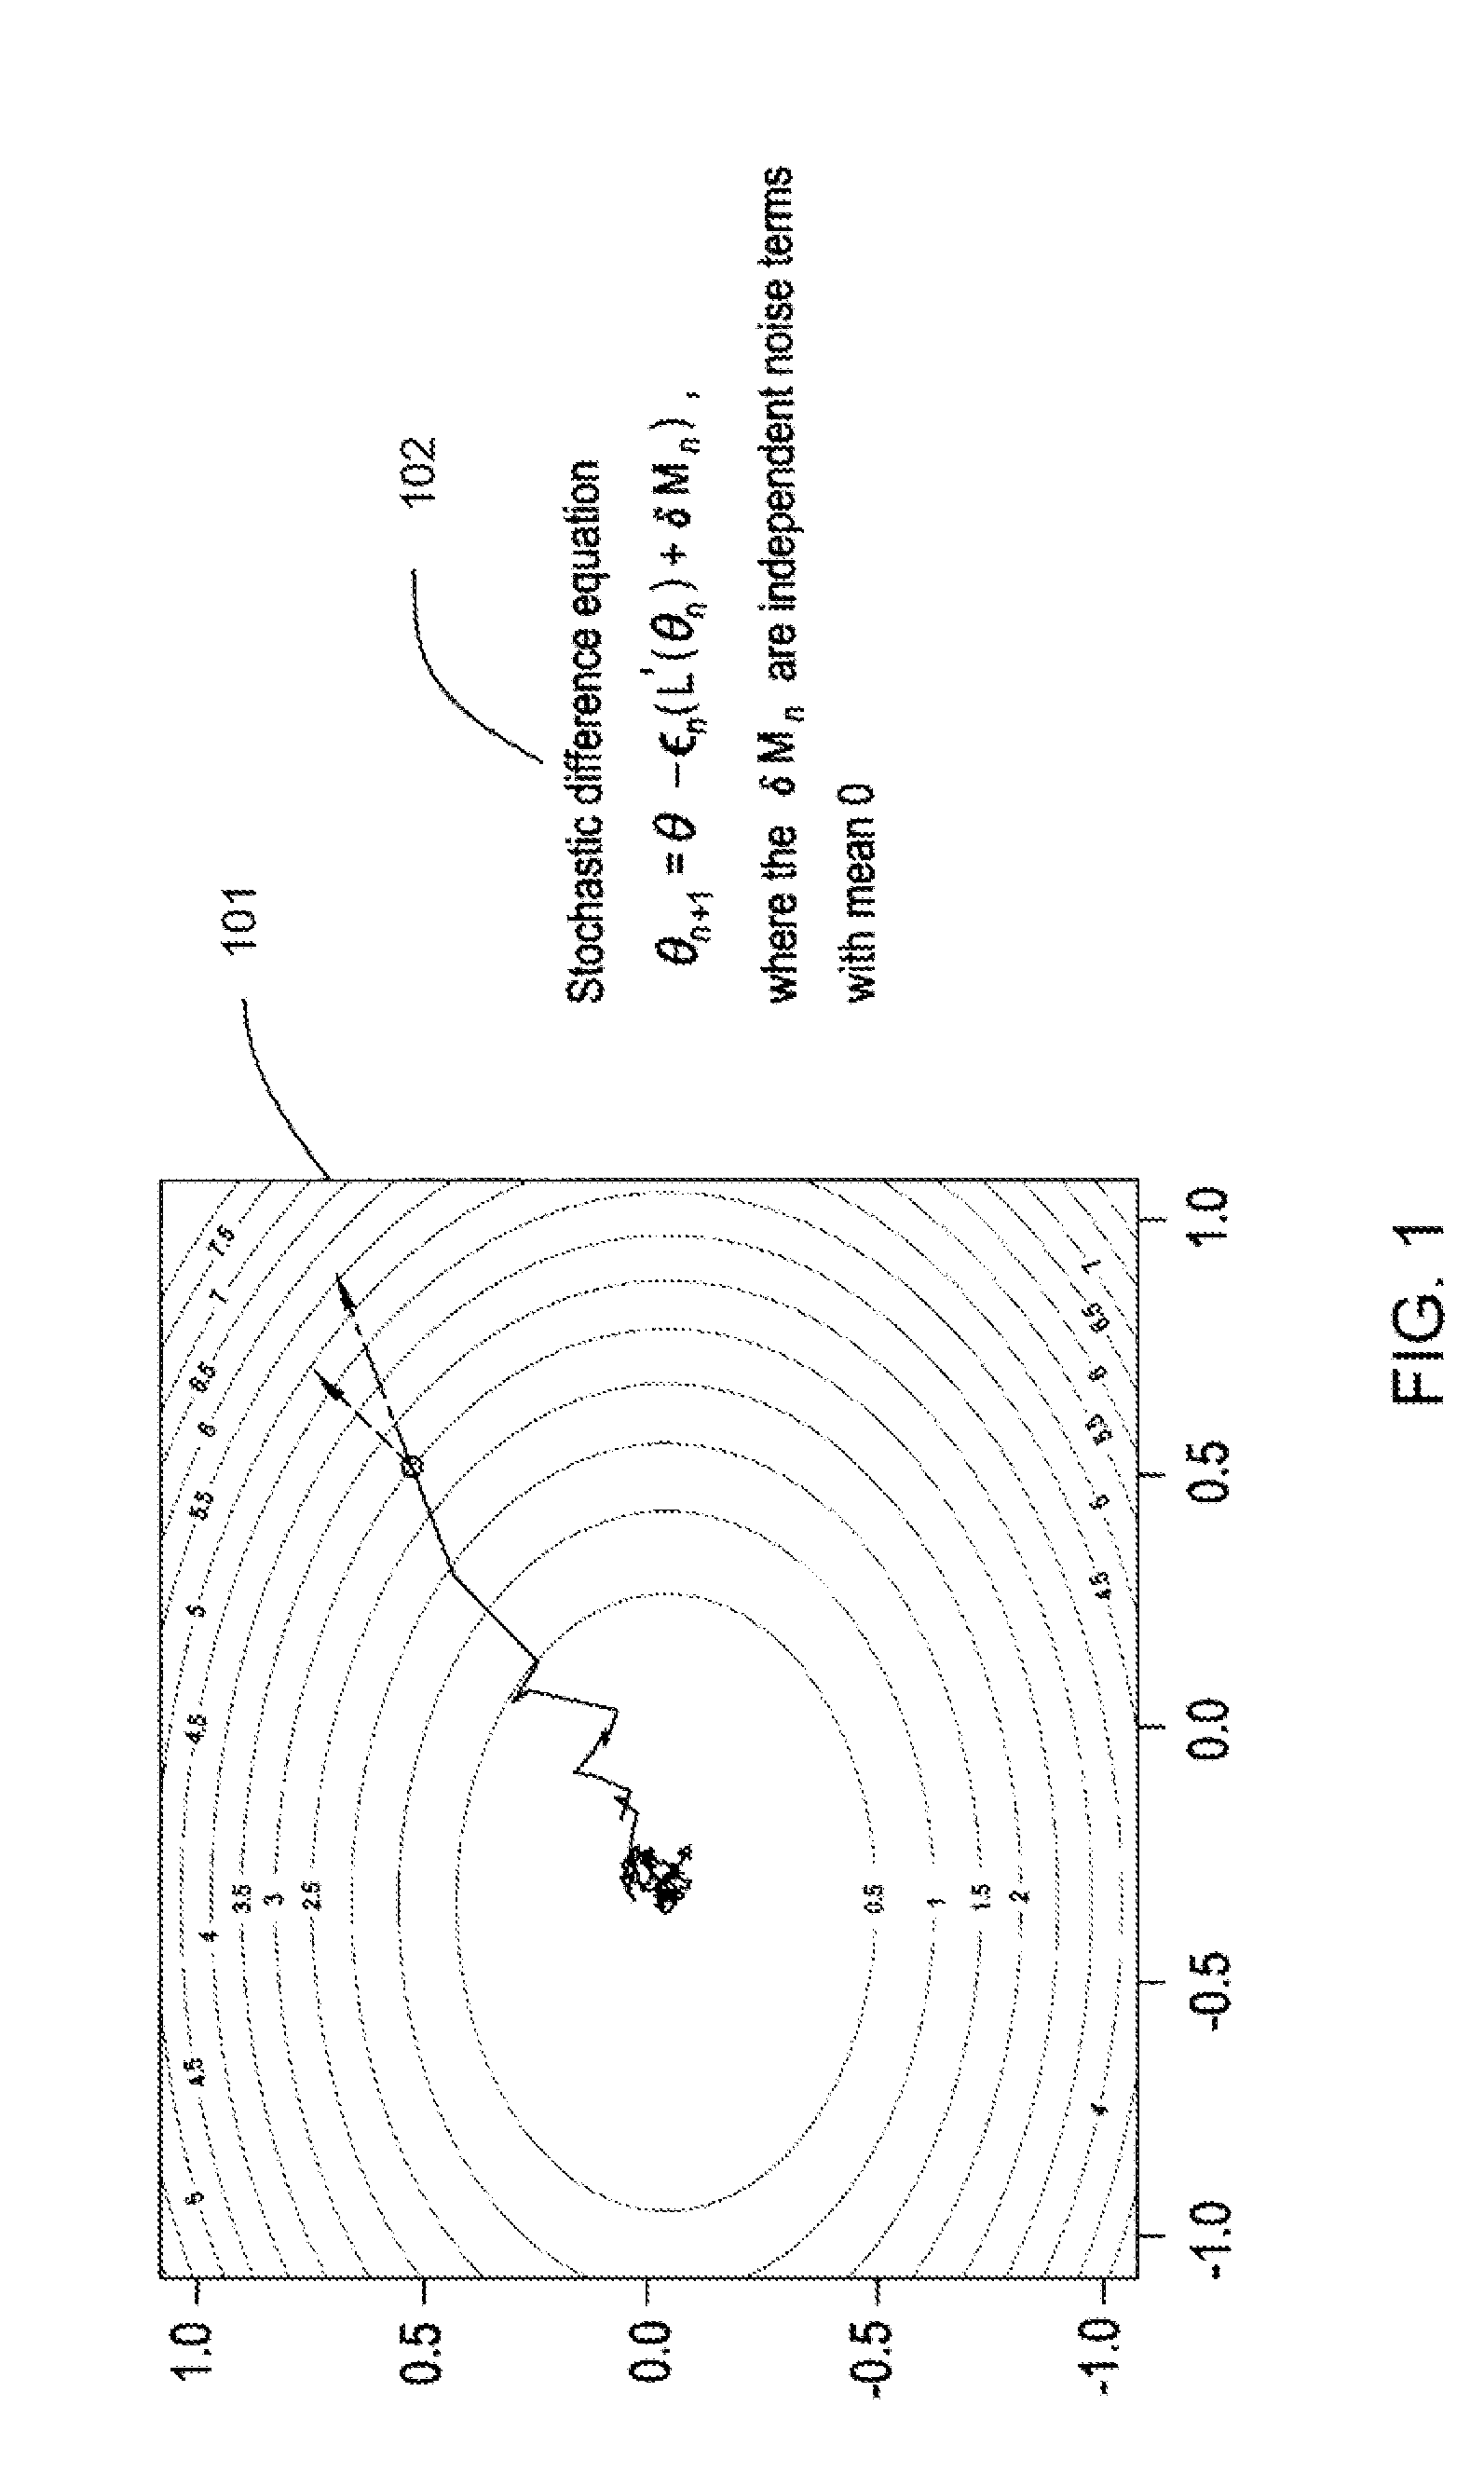 Systems and methods for large-scale randomized optimization for problems with decomposable loss functions